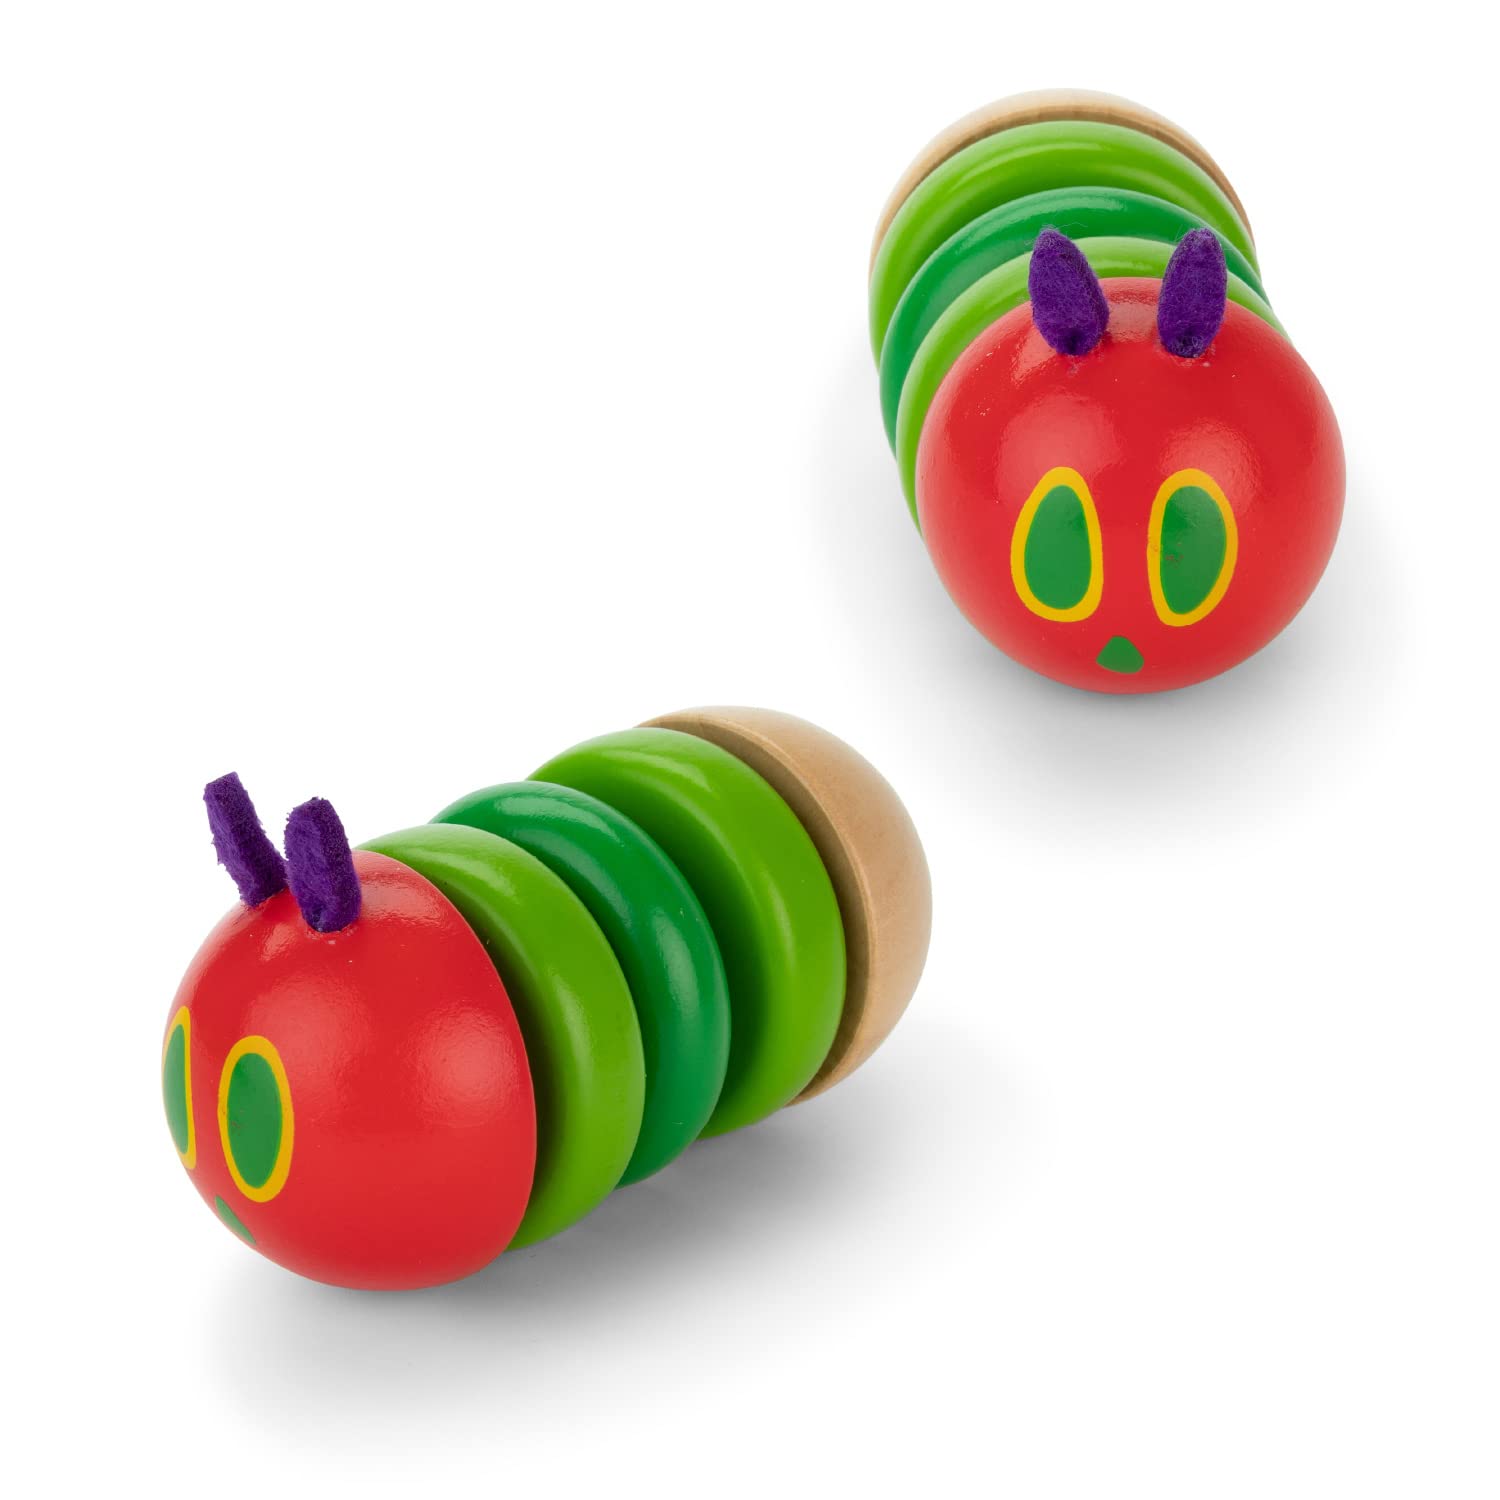 KIDS PREFERRED World of Eric Carle The Very Hungry Caterpillar Newborn Wooden Fidget Toy, Baby Sensory Caterpillar Shaker Rattle for Infants, Babies, and Toddlers